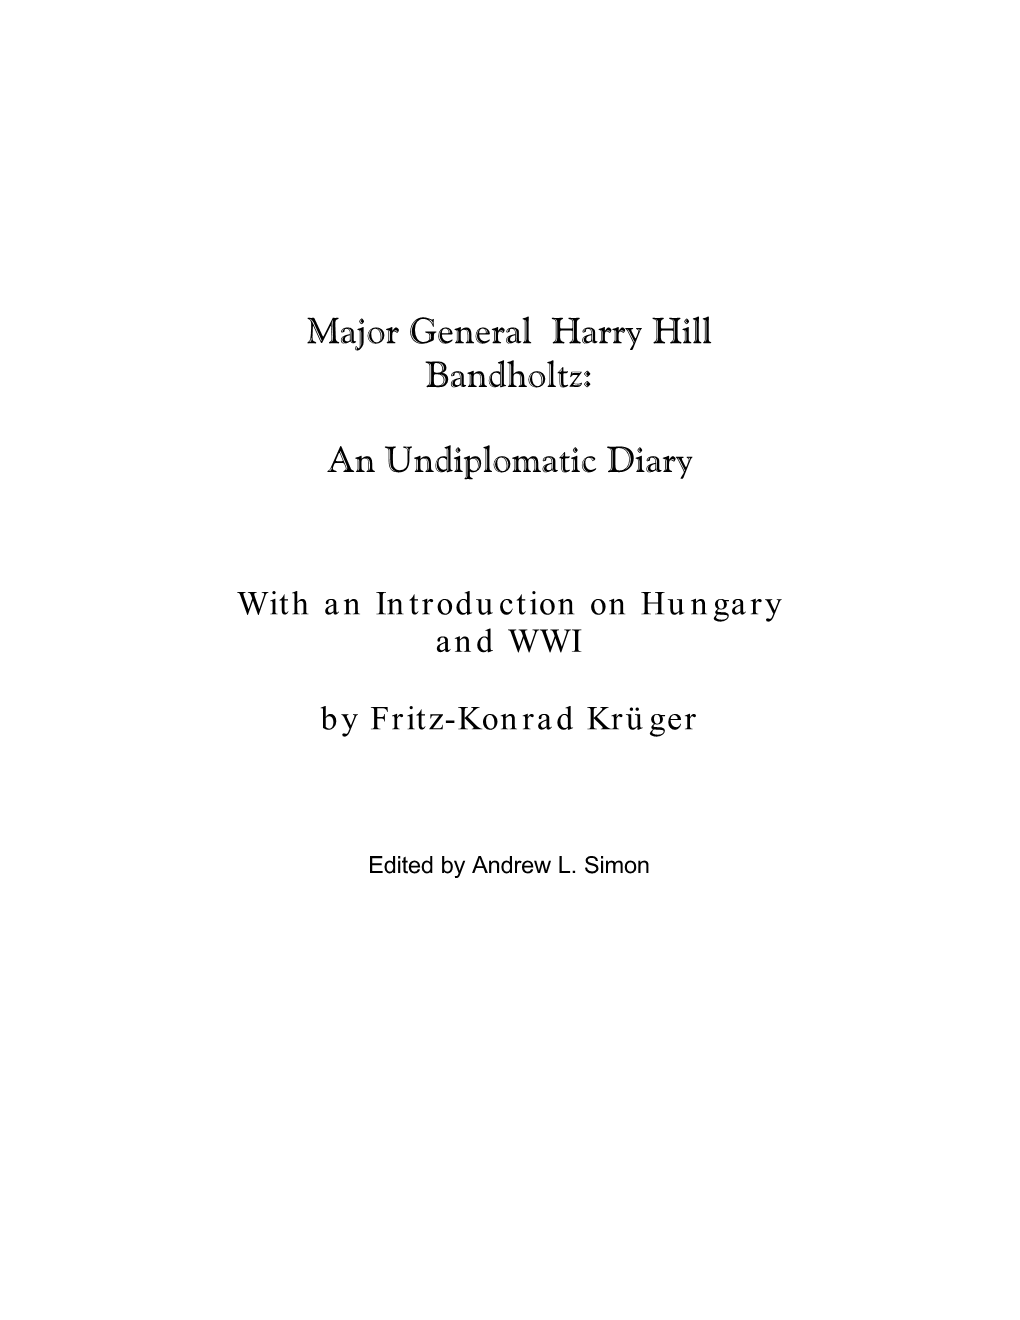 Major General Harry Hill Bandholtz: an Undiplomatic Diary